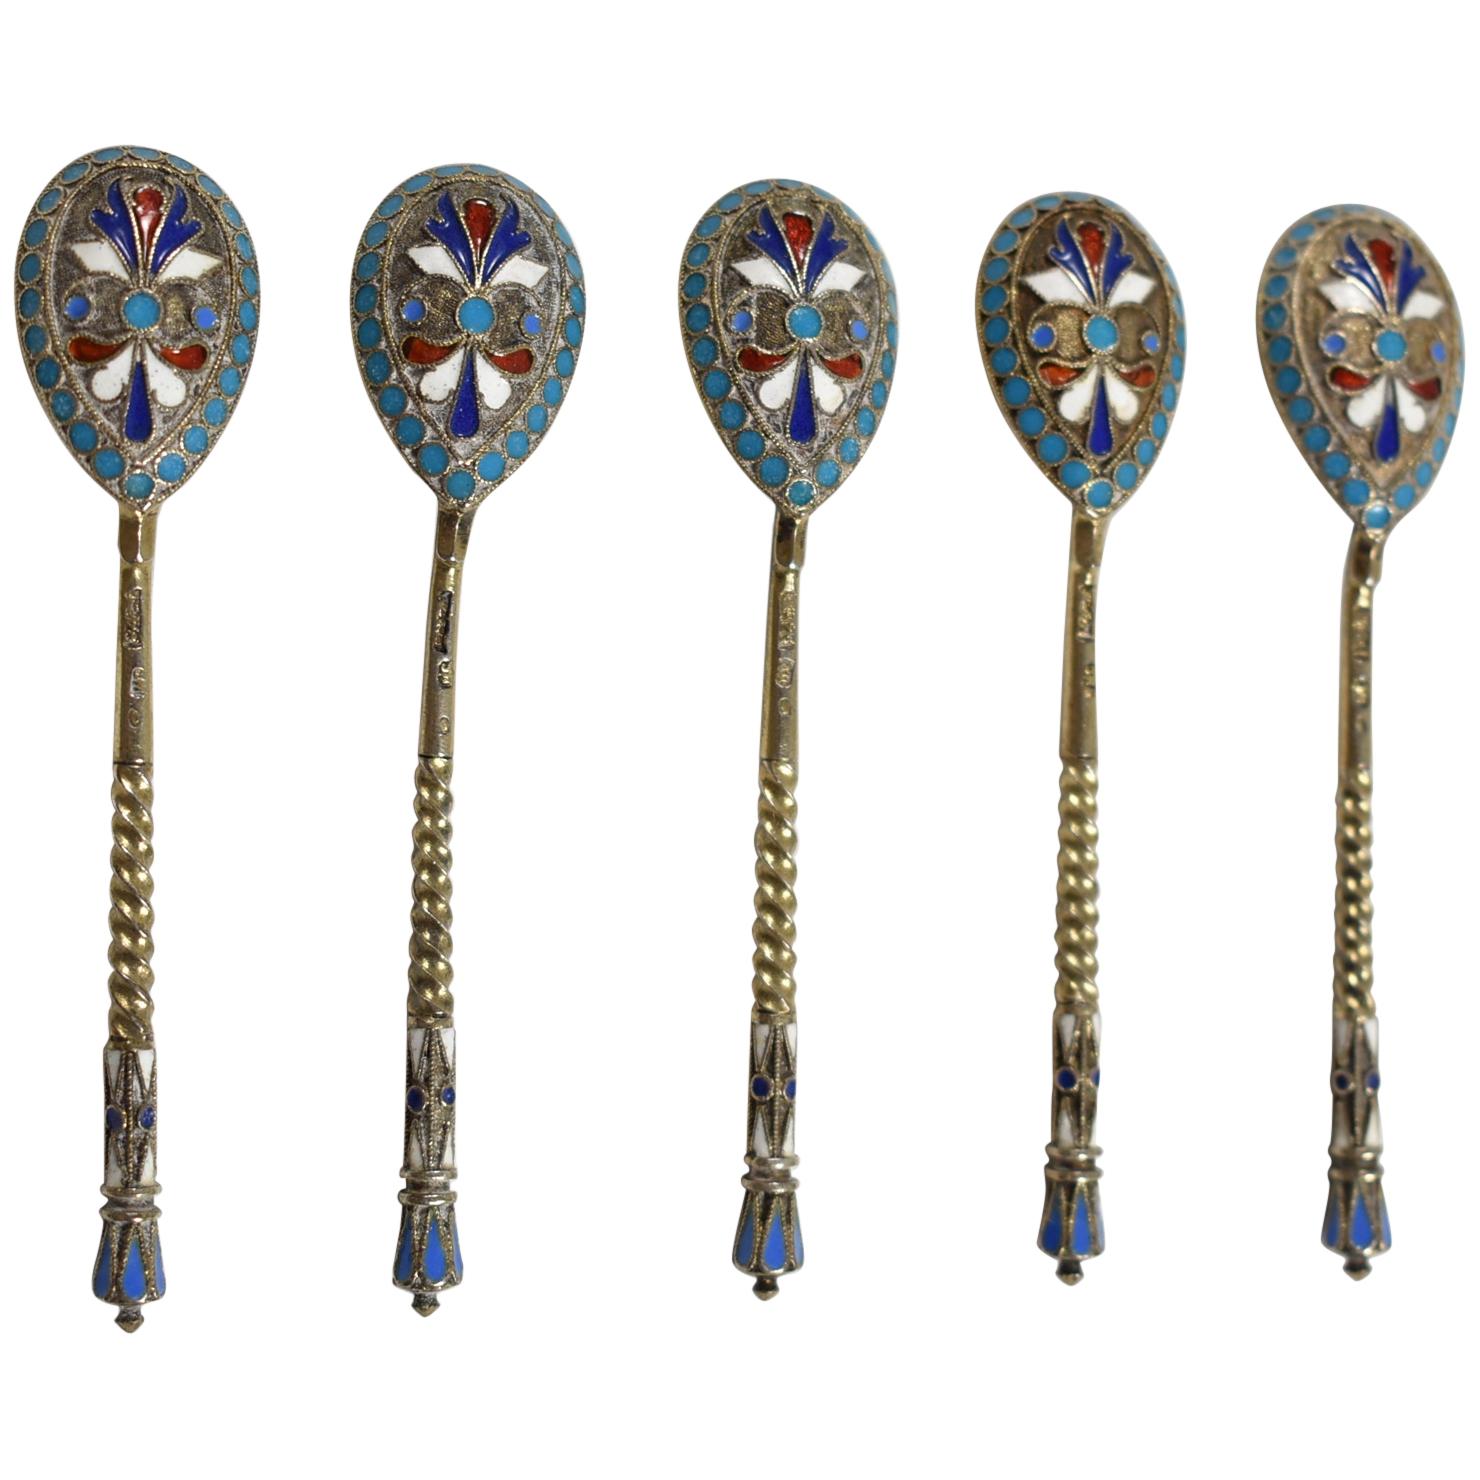 Antique Six Russian Imperial .875 Silver and Enamel Spoons